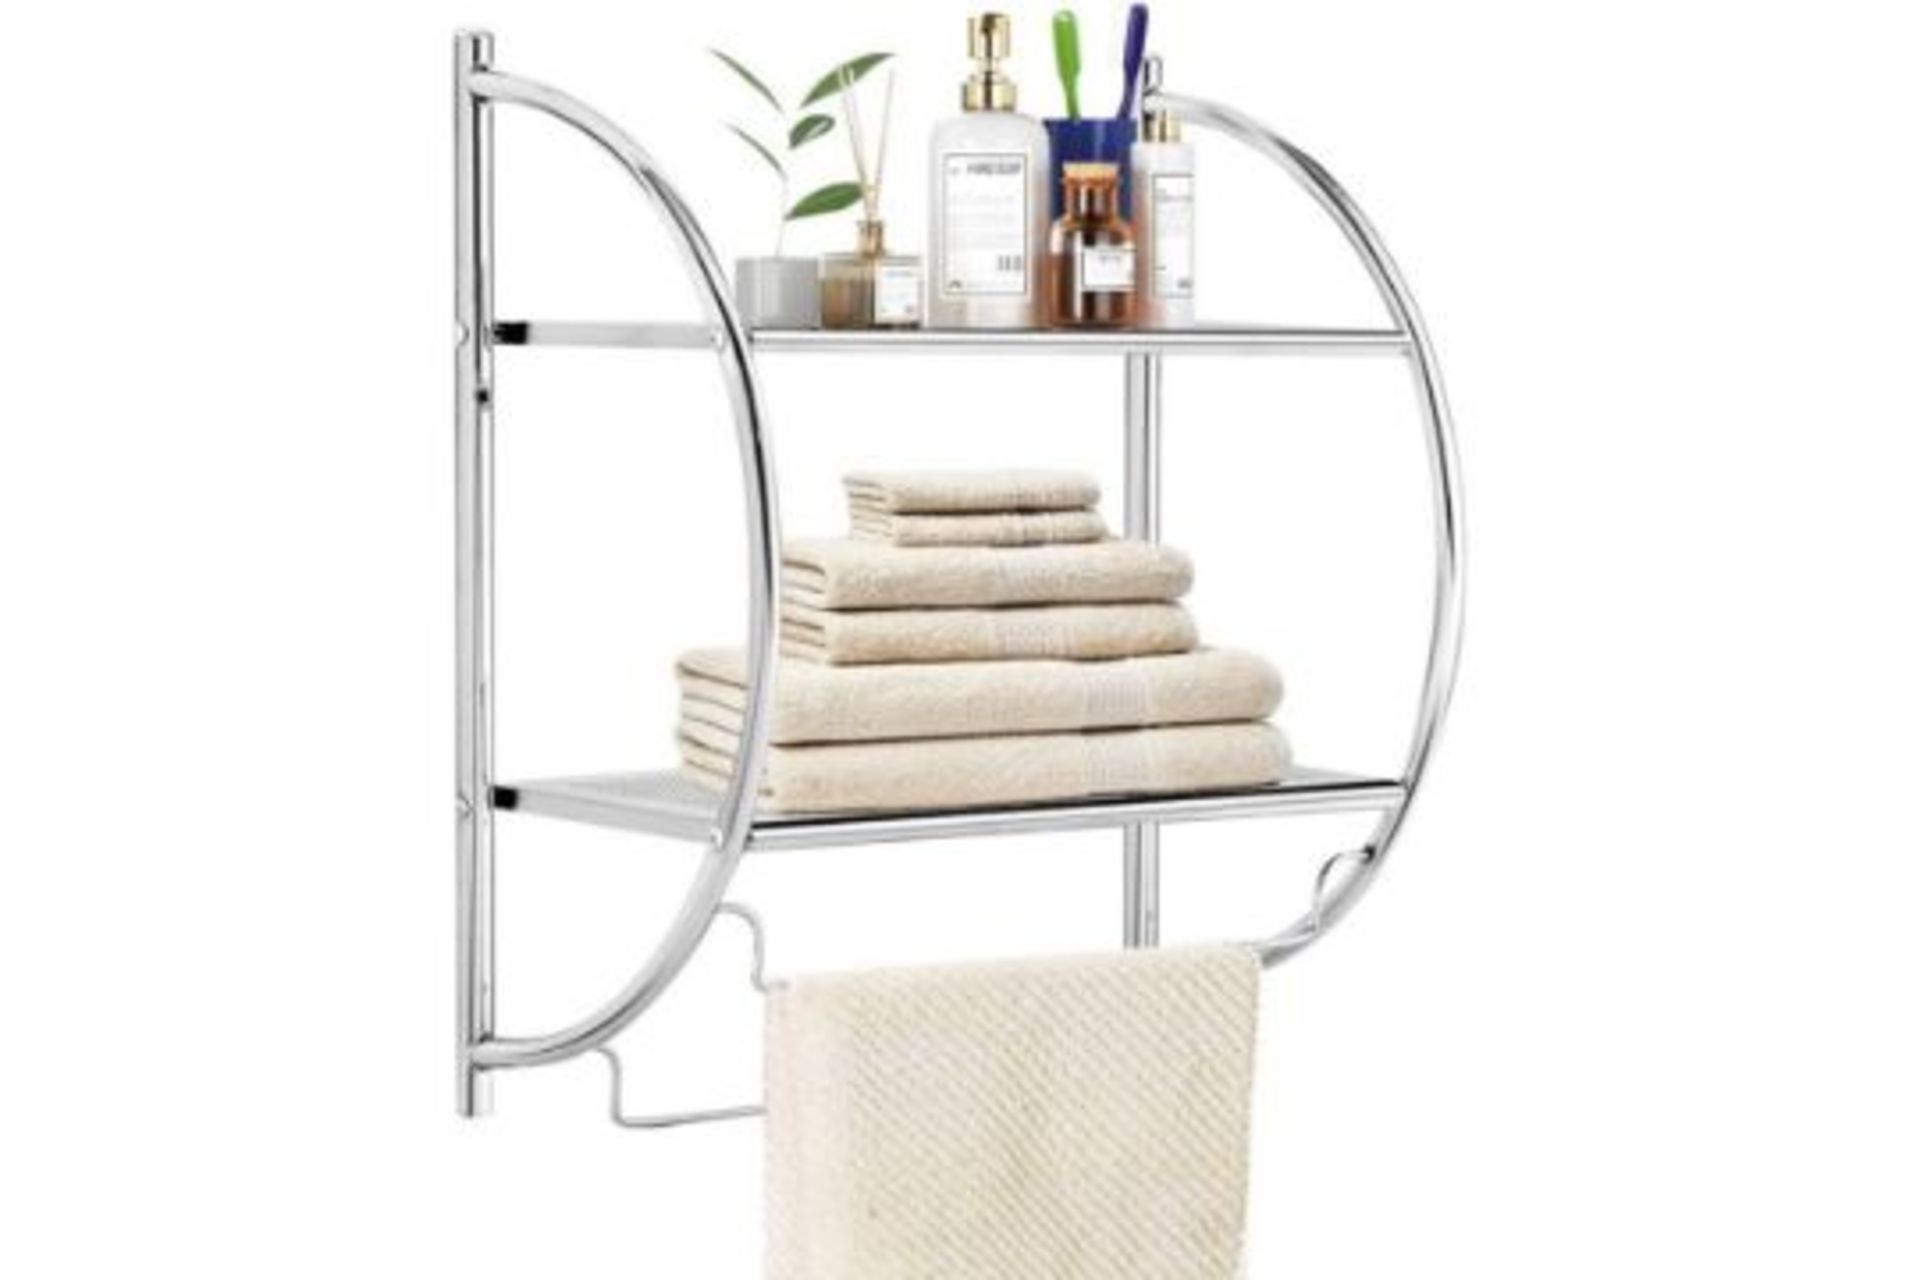 Wall Mounted Towel Rack, 2 Tiers Curved Display Organiser Shelving Unit, Home Kitchen Bathroom